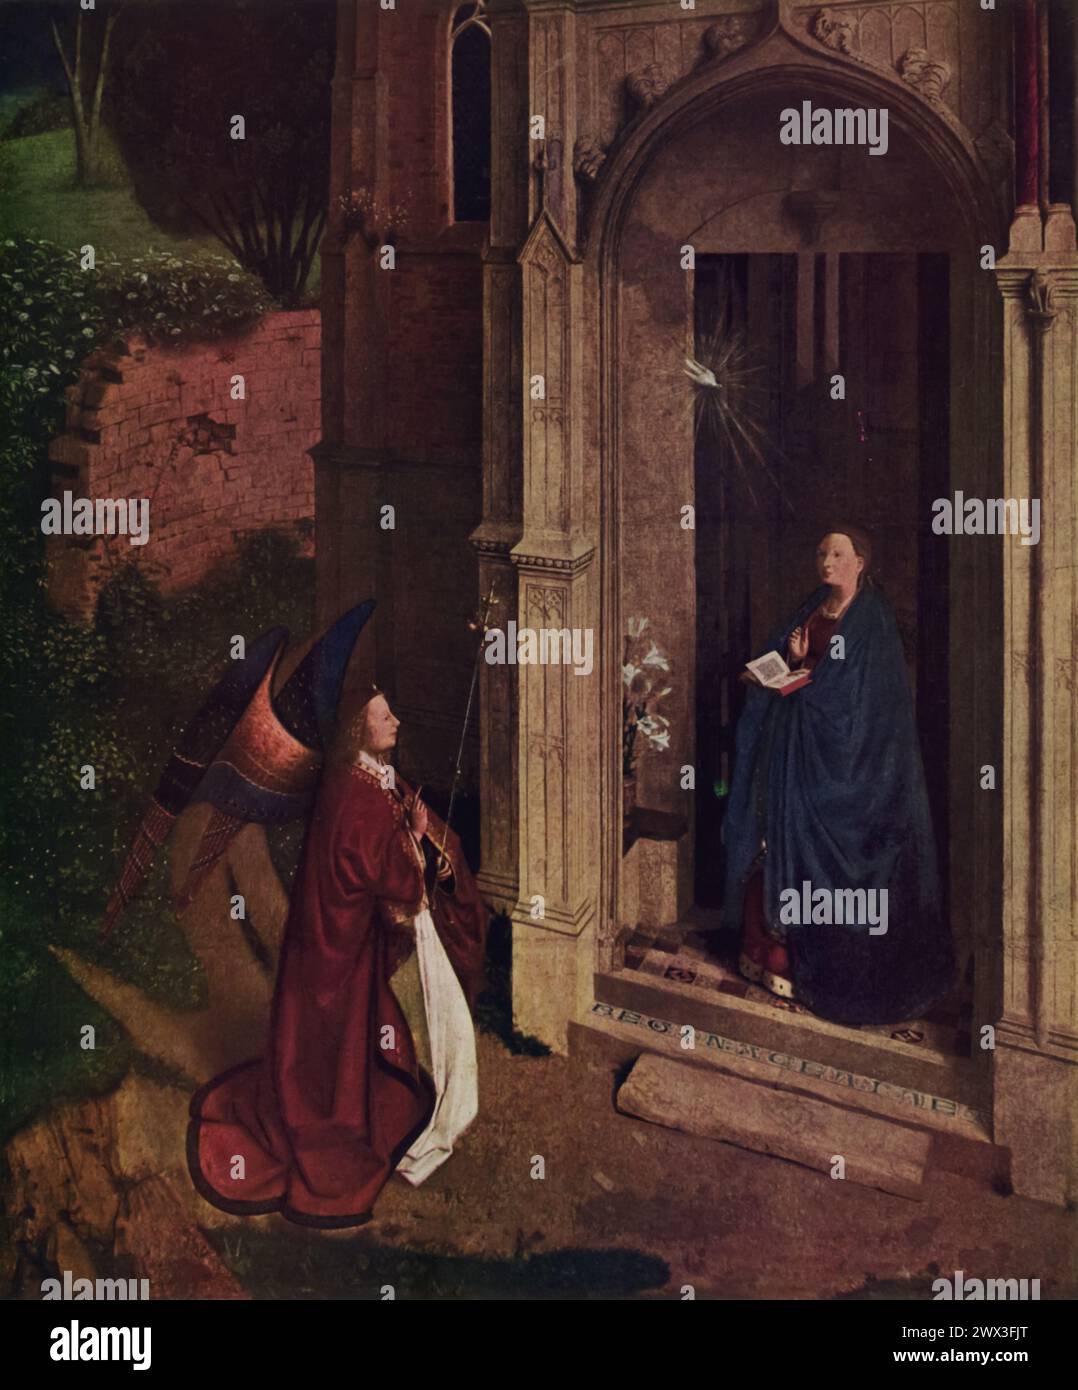 Jan van Eyck's 'The Annunciation' (circa 1434): Located in the National Gallery of Art, Washington, D.C., this painting illustrates the biblical moment when the Angel Gabriel announces to the Virgin Mary that she will bear the Son of God. It reflects the Northern Renaissance's focus on naturalism and meticulous attention to detail, making it a significant piece for its time. Stock Photo